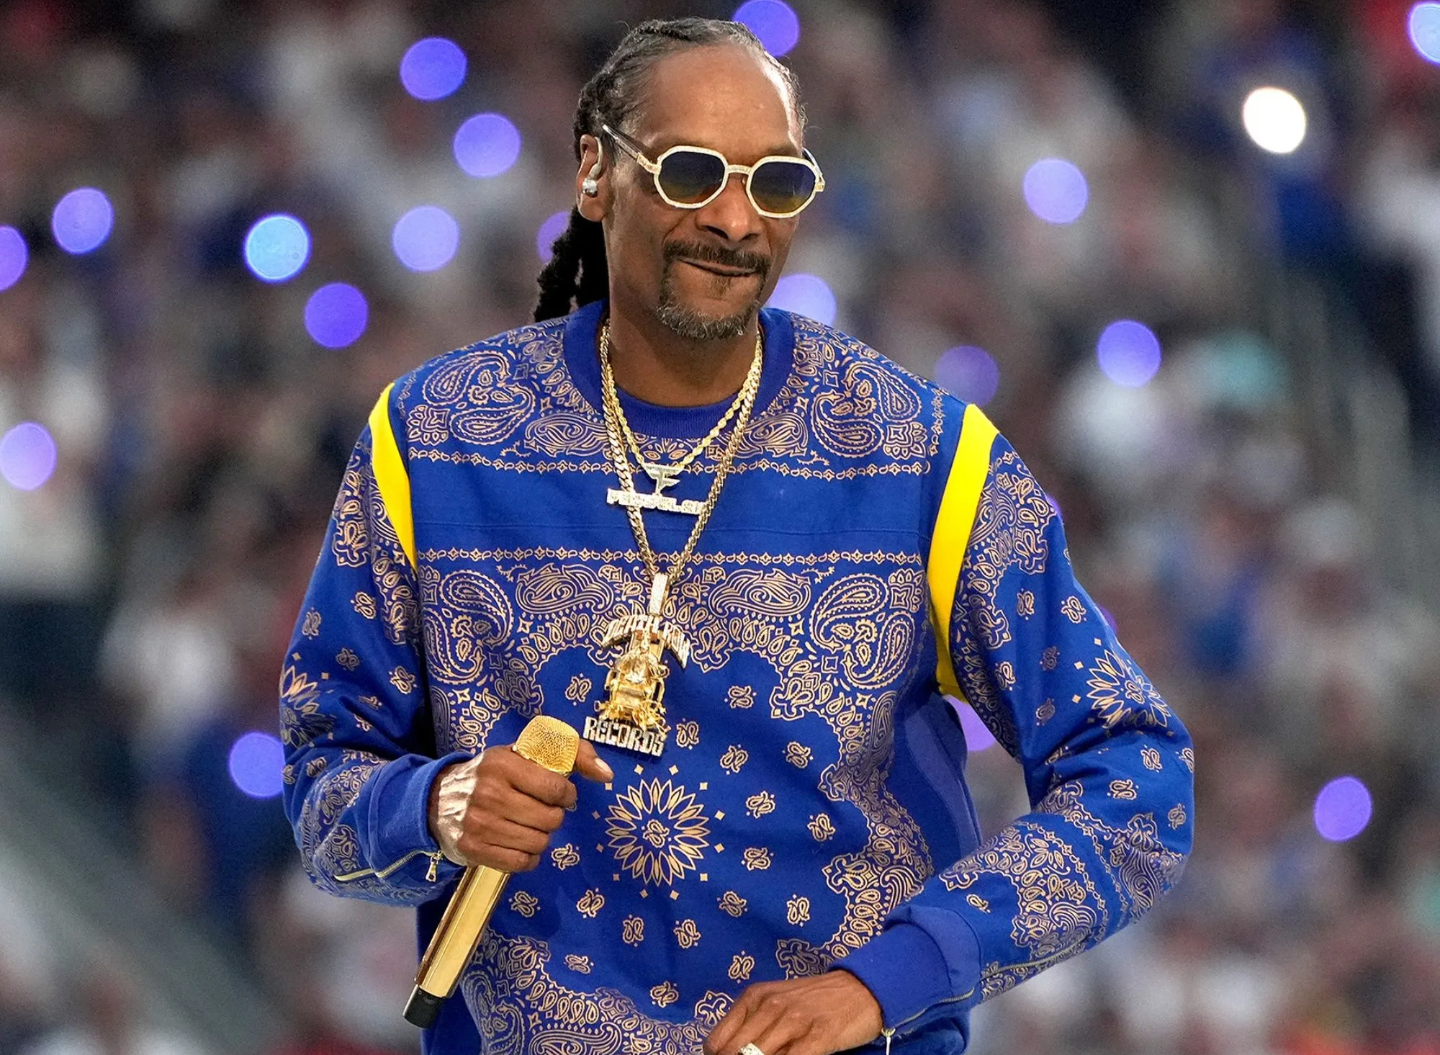 Snoop Dogg wearing a blue bandana patterned sweater while holding a gold microphone